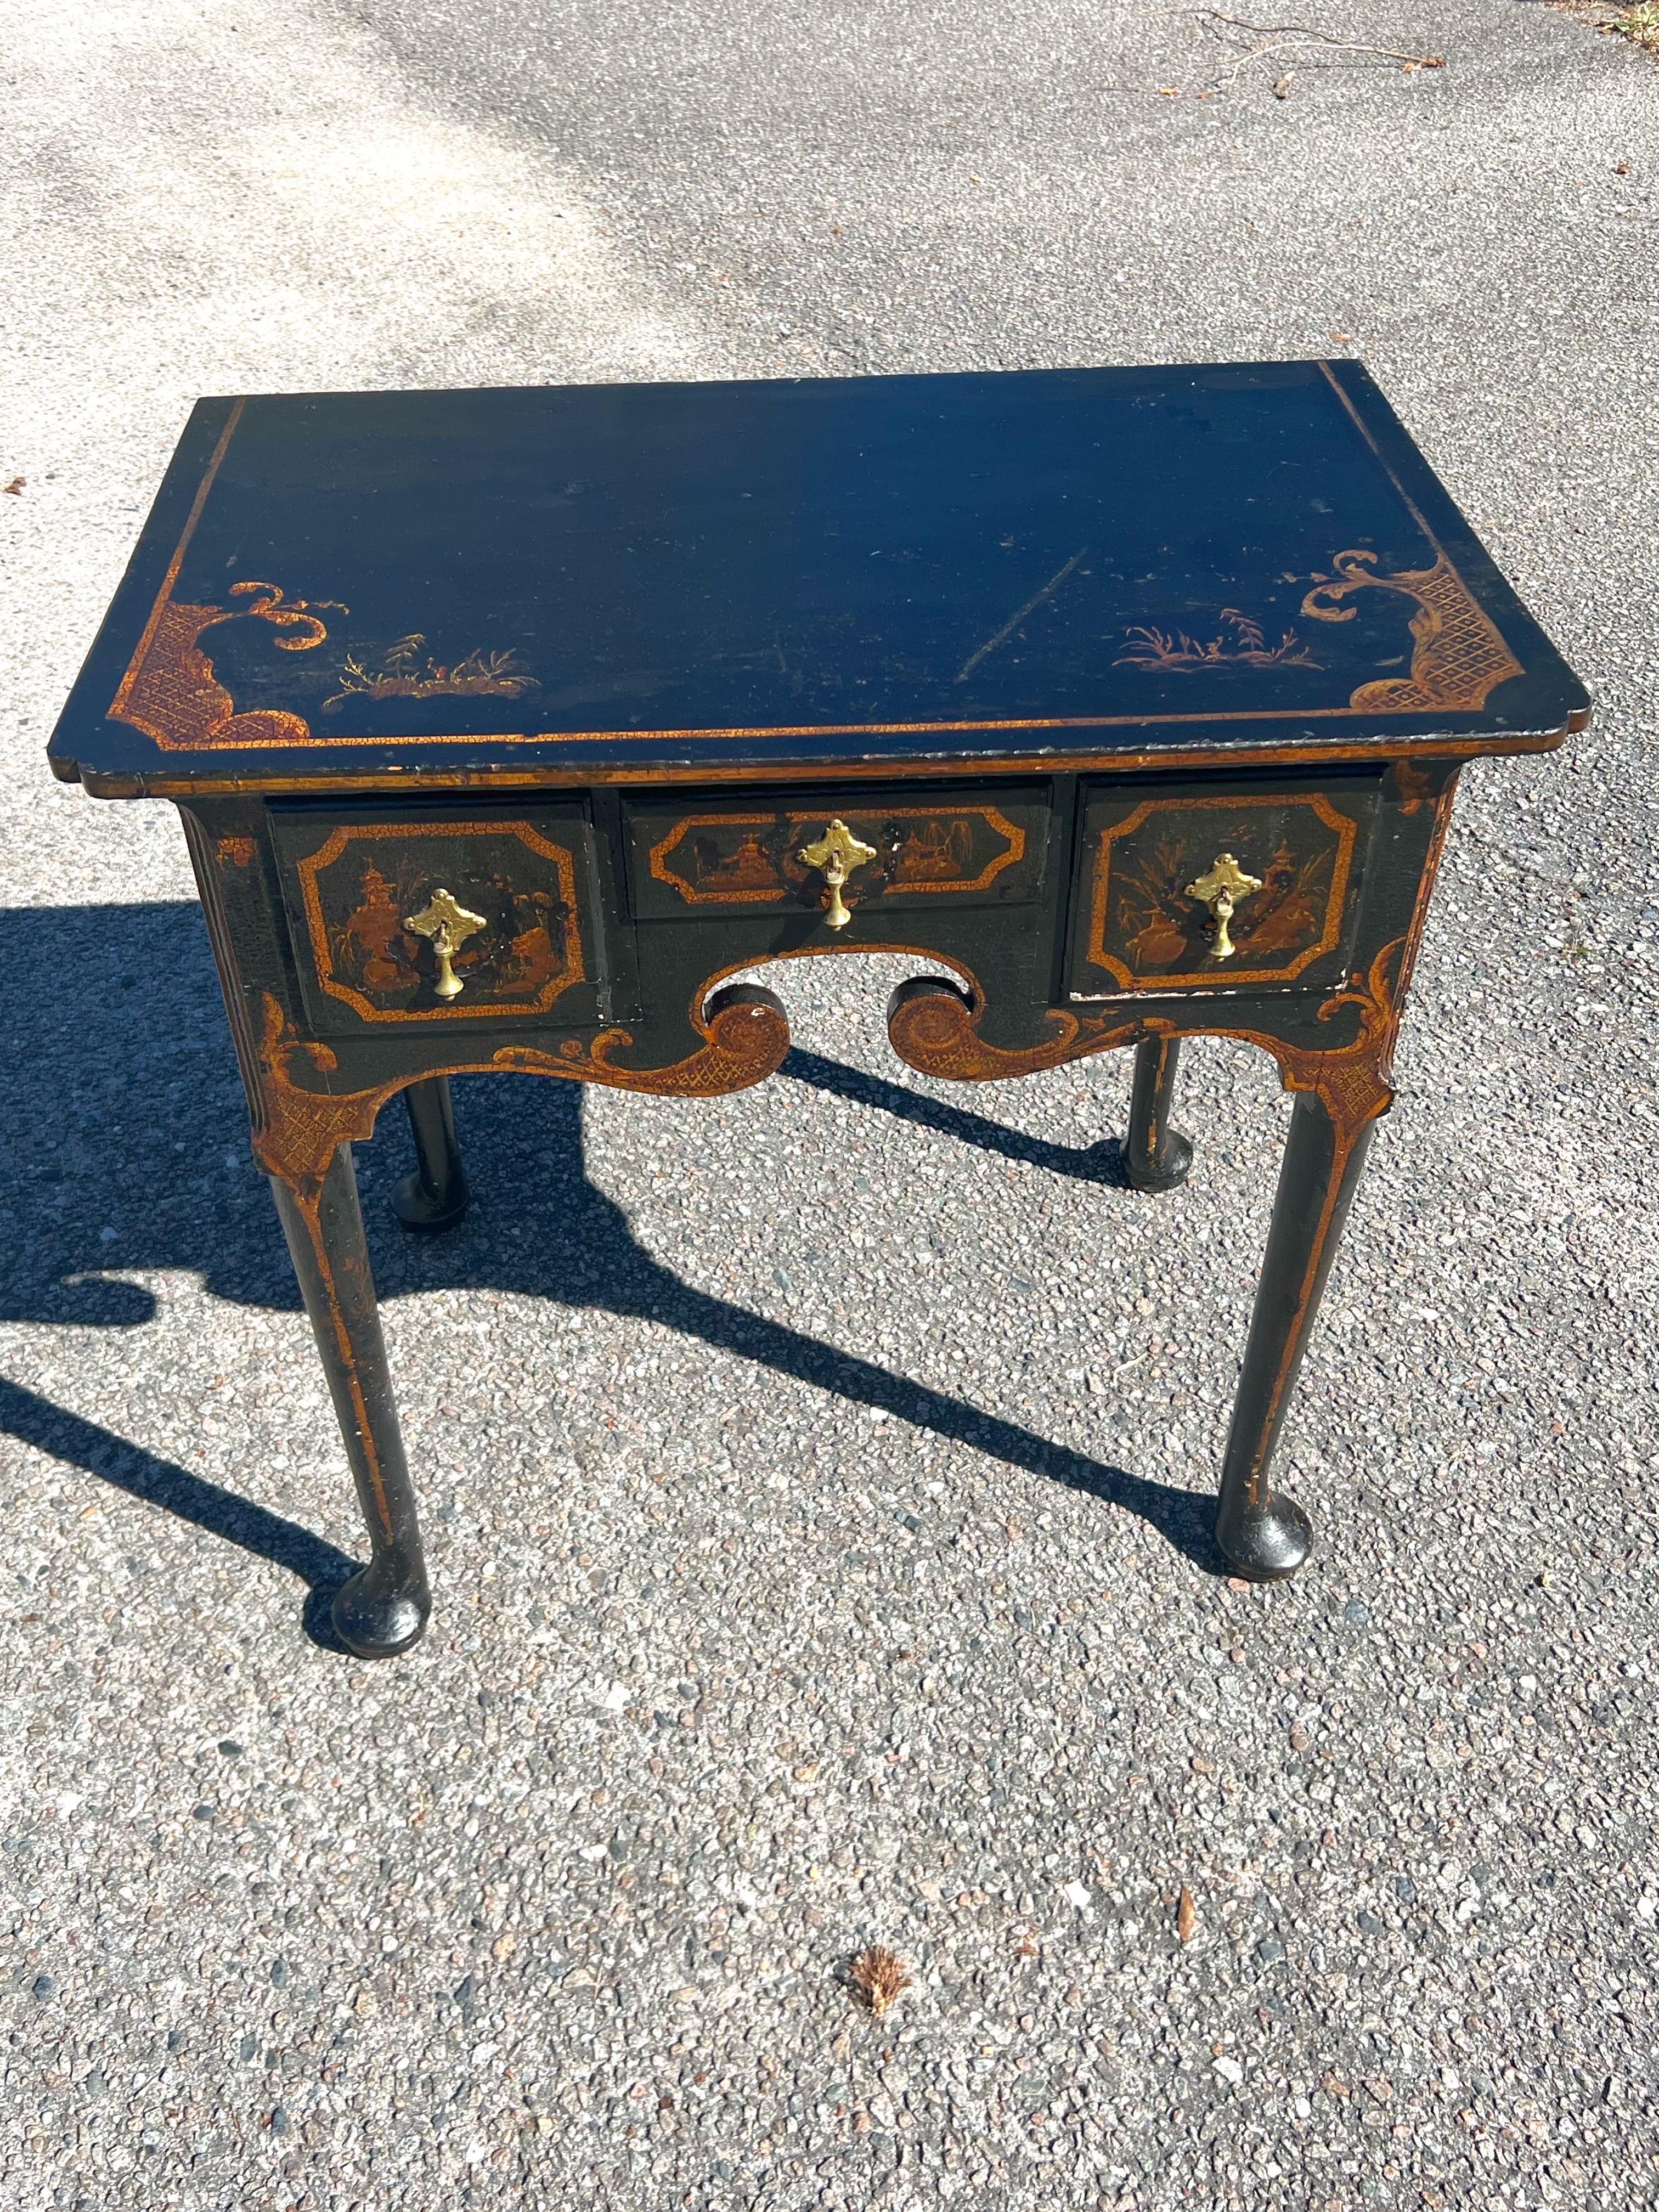 This is a rare form in a decorated lacquer surface, and a sturdy table that is very well built. The original top retains its first decorative Chinoiserie embellishments, as do the drawers, sides, and back. Looking at the images, one sees a